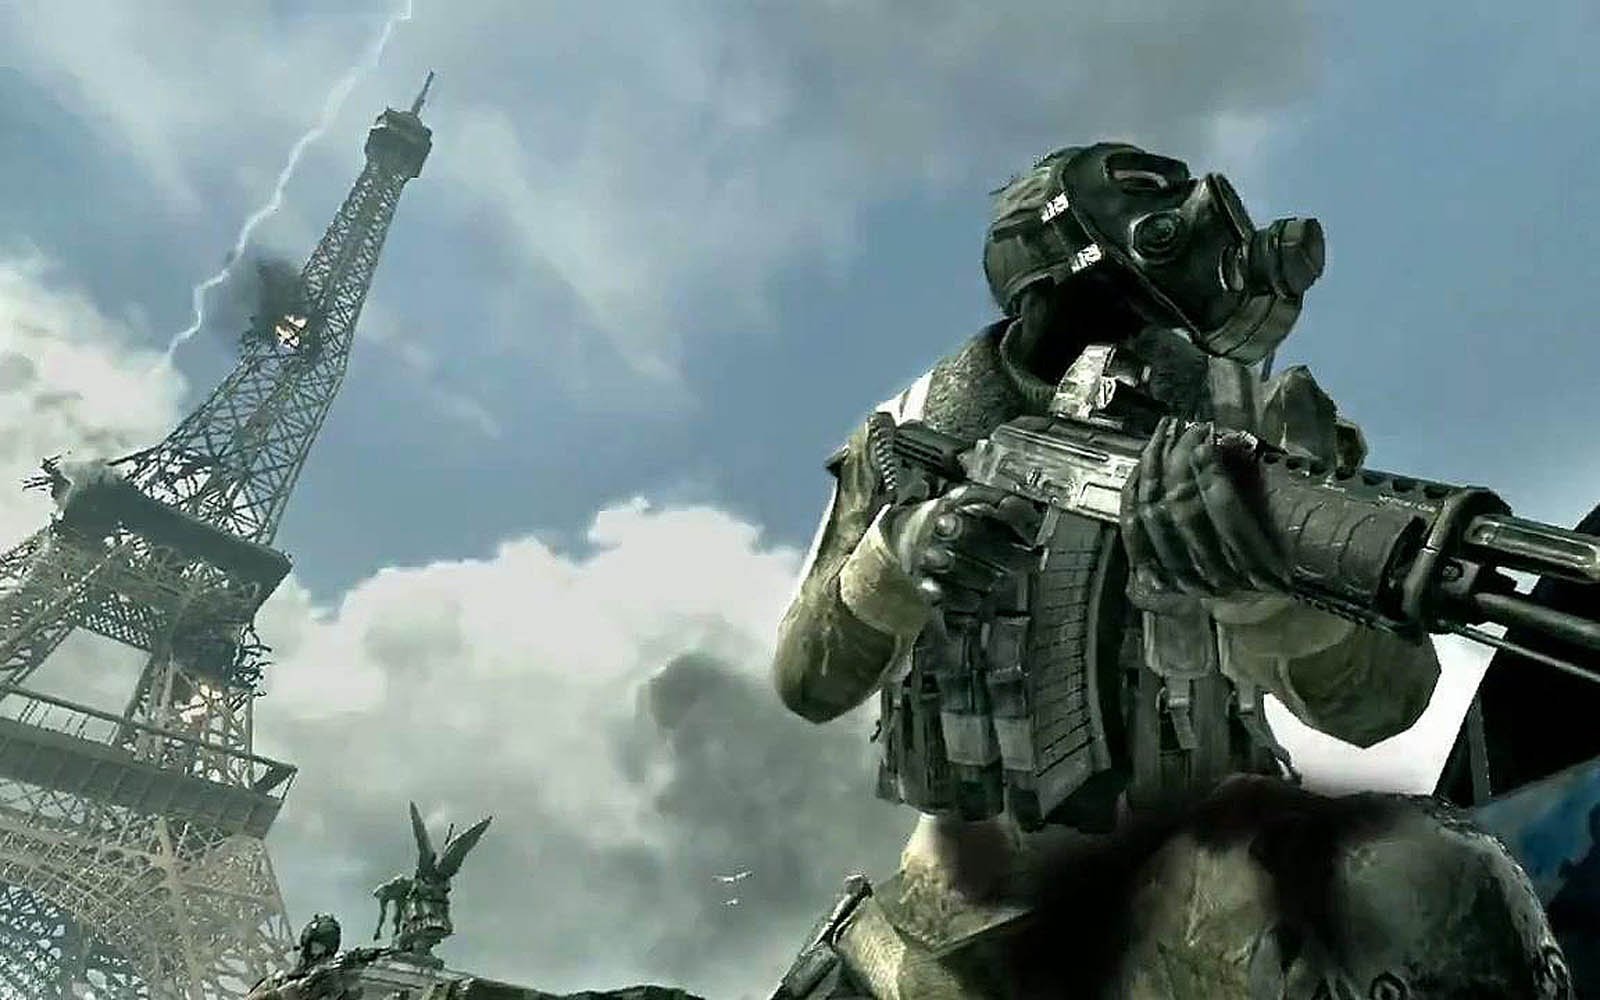 Tag Call Of Duty Modern Warfare Wallpaper Background Paos